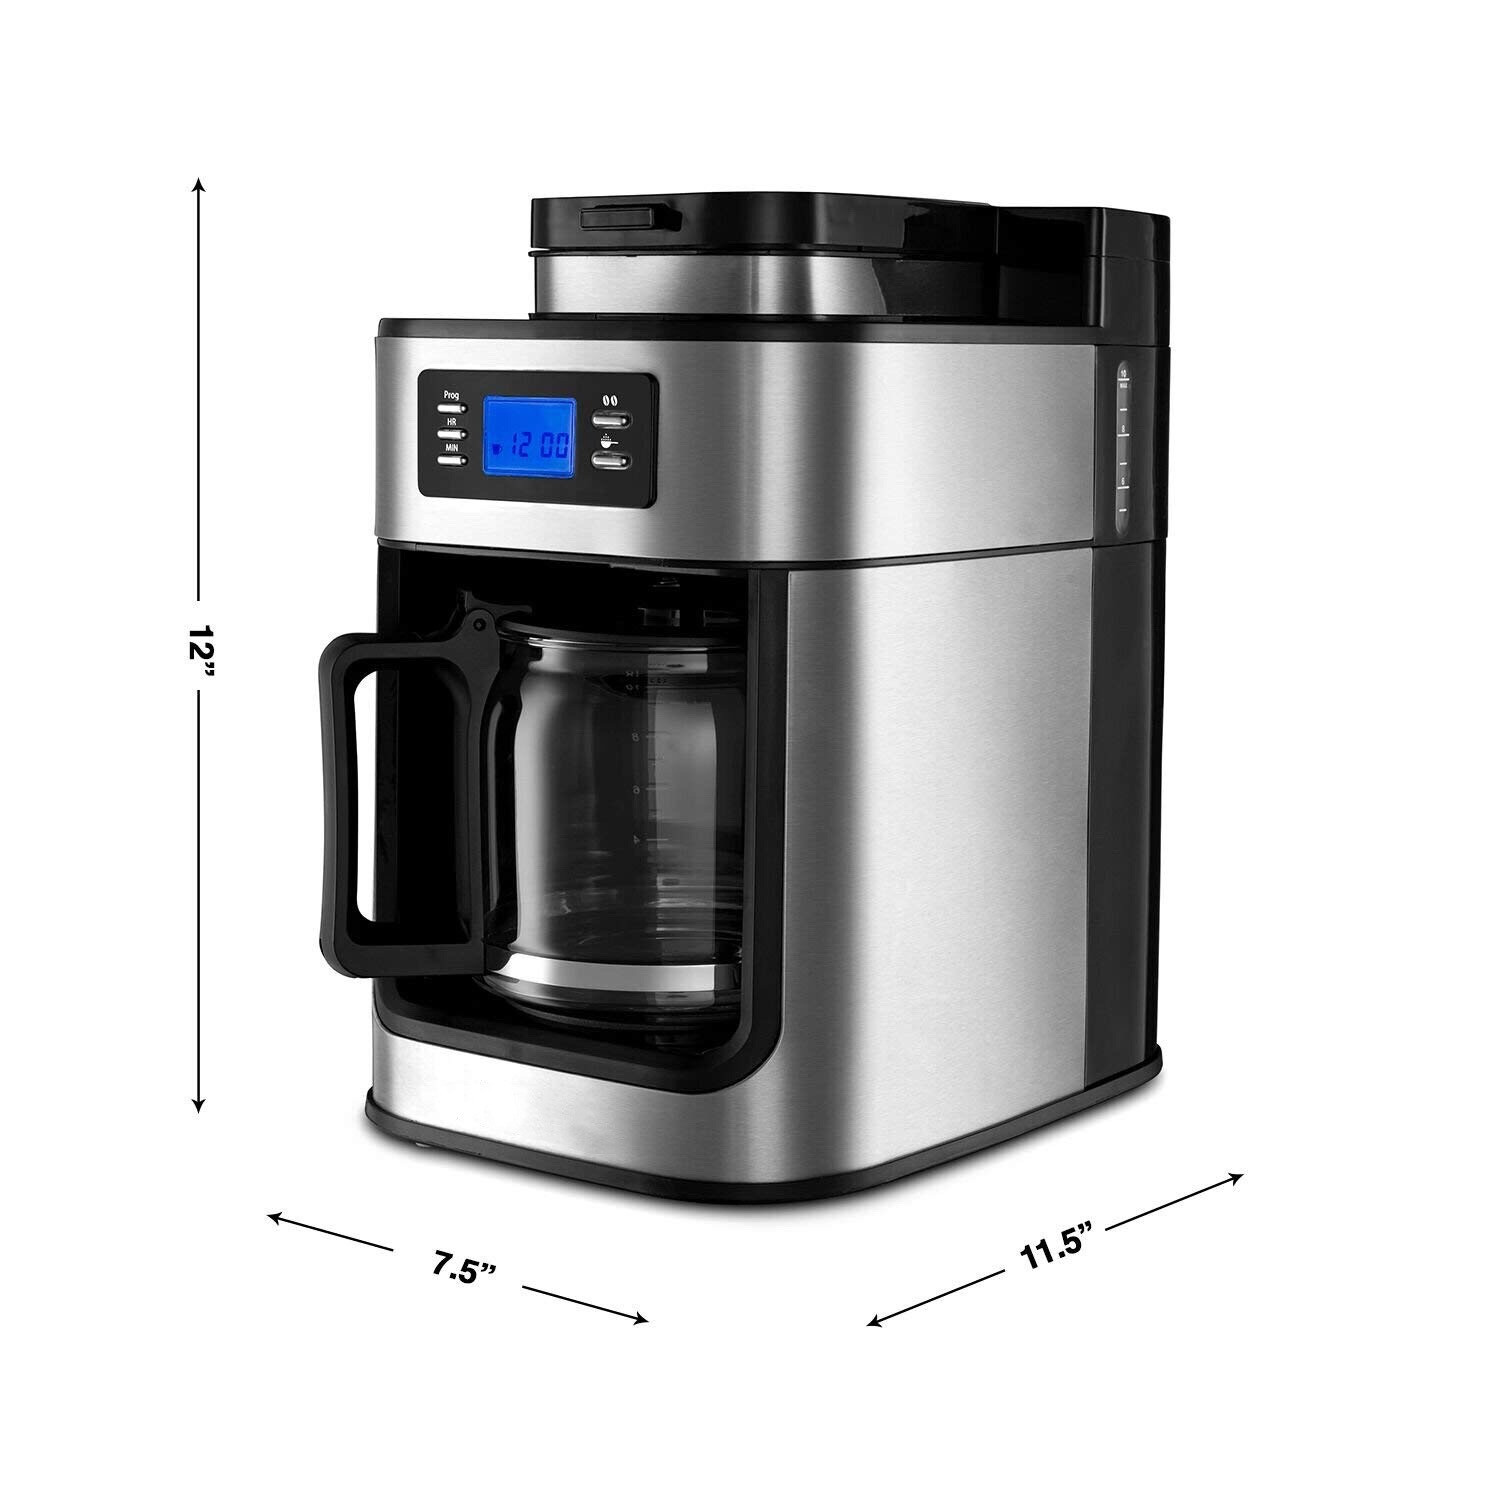 Coffee Machine with Built-in Grinder - App Controlled - Beans or Pre-Ground - Programmable Timer &amp; LED Display